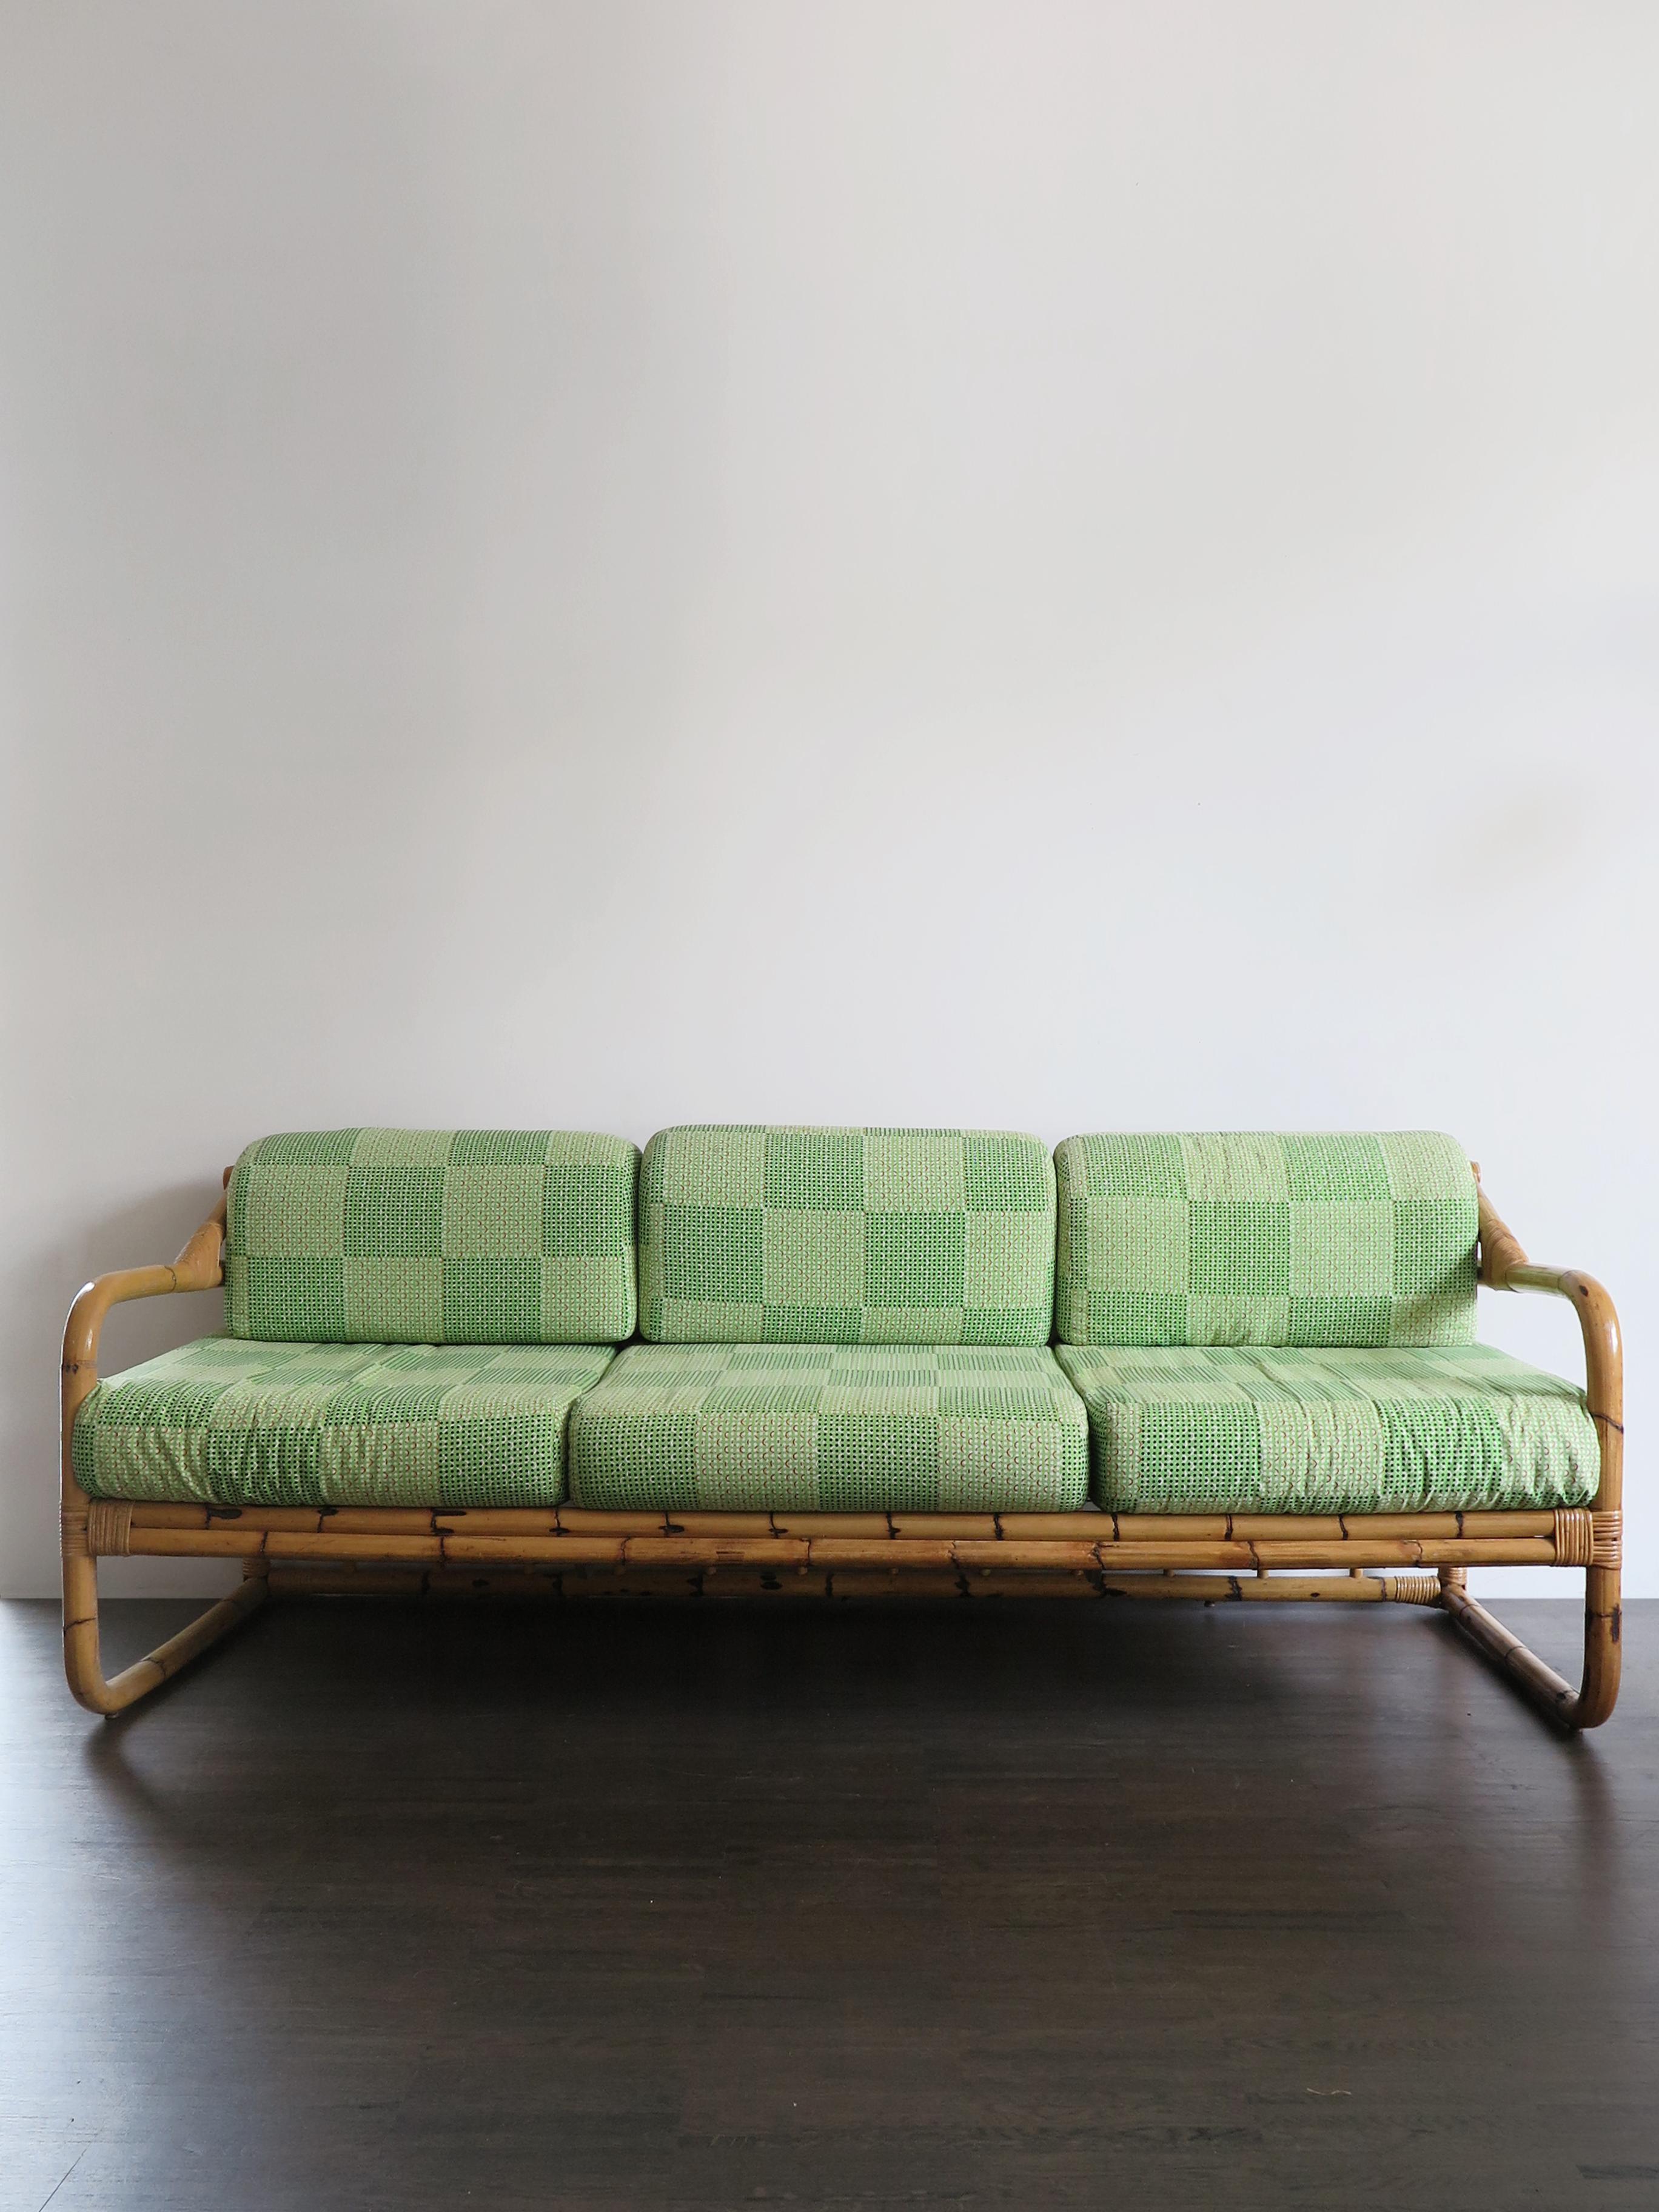 Italian mid-century modern design sofa bed in the style of Bonacina with bamboo frame and cushions with original fabric of the period and metal bed base, Italy 1960
Please note that the sofa bed is original of the period and this shows normal signs